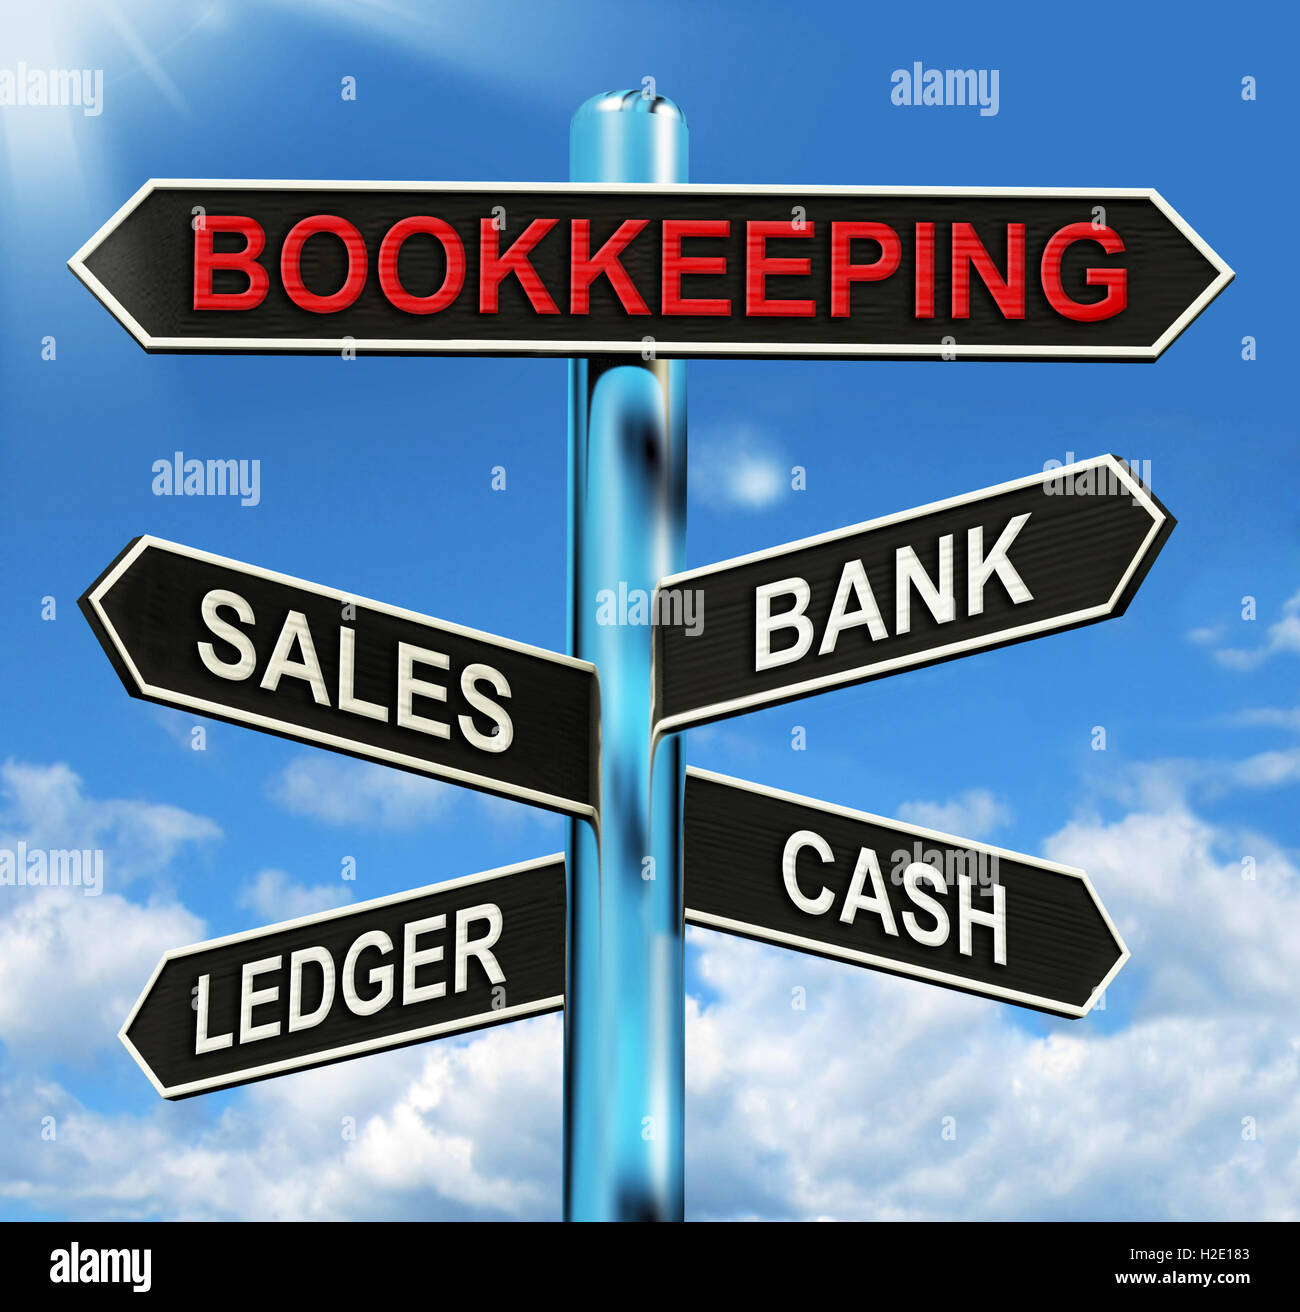 Bookkeeping Sign Means Sales Ledger Bank And Cash Stock Photo